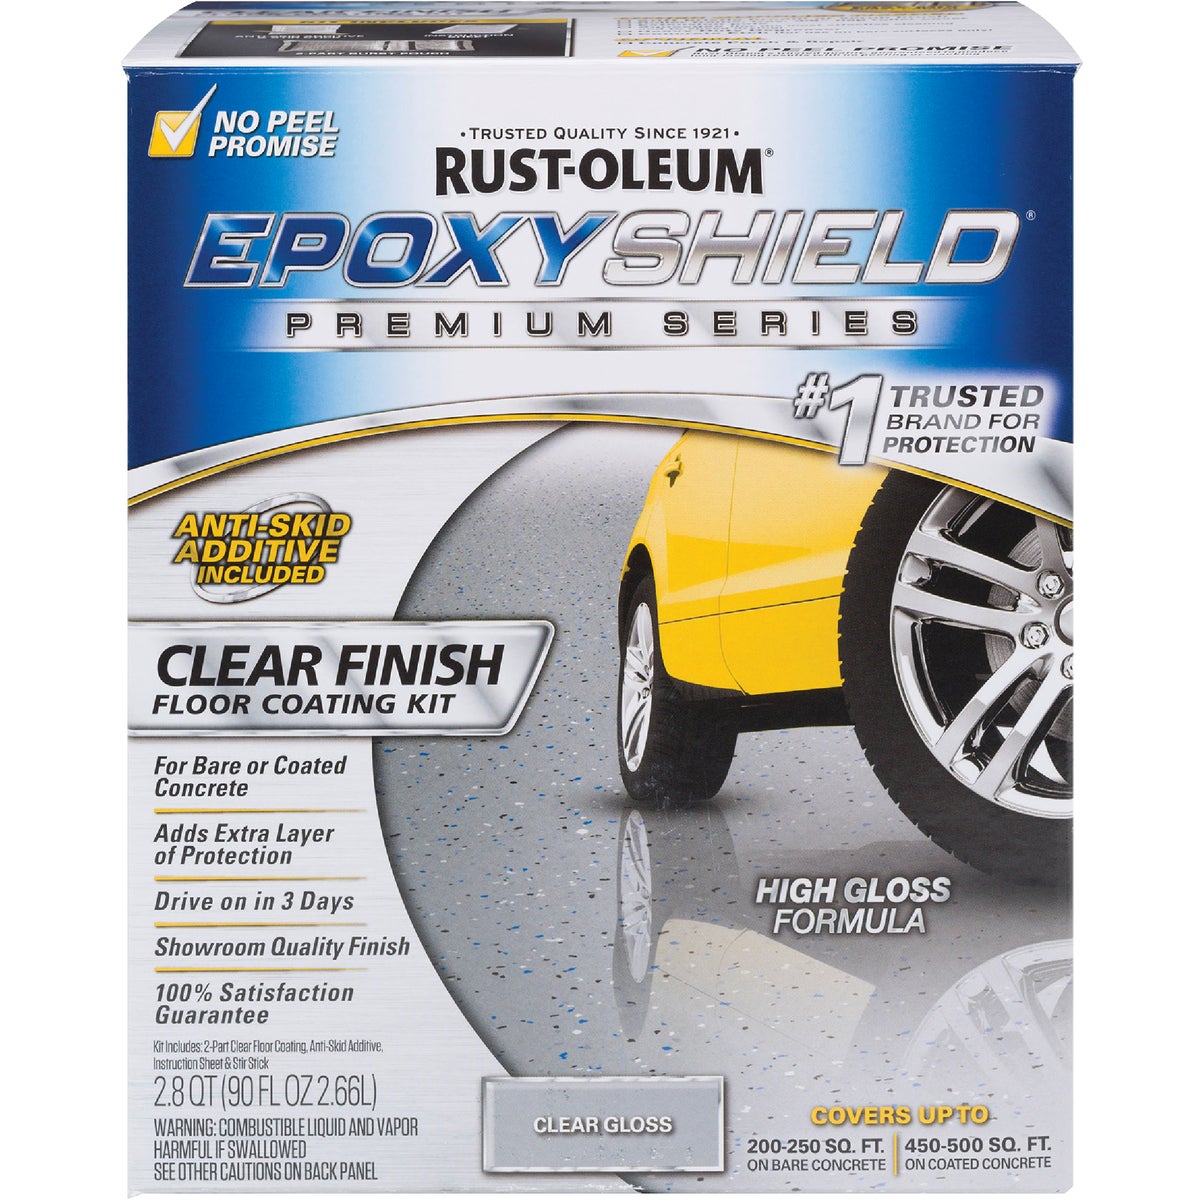 Item 771736, Rust-Oleum EpoxyShield Premium Clear Coating adds a high-gloss protective 